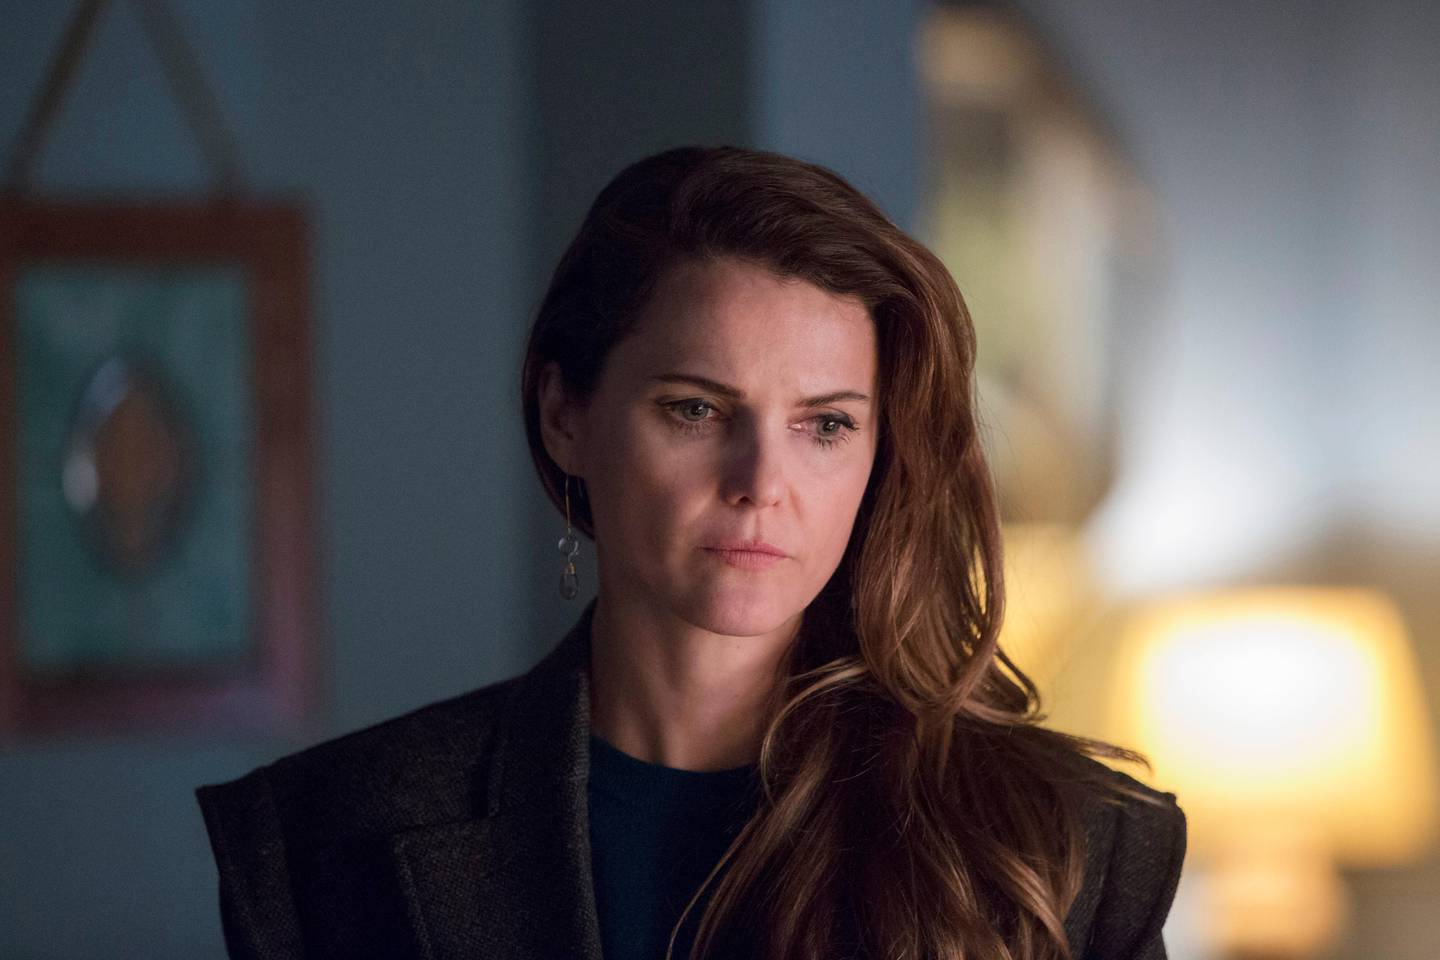 This image released by FX shows Keri Russell in a scene from "The Americans." On Thursday, Dec. 6, 2018,  Russell was nominated for a Golden Globe award for lead actress in a drama series for her role in the series. The 76th Golden Globe Awards will be held on Sunday, Jan. 6. (Eric Liebowitz/FX via AP)